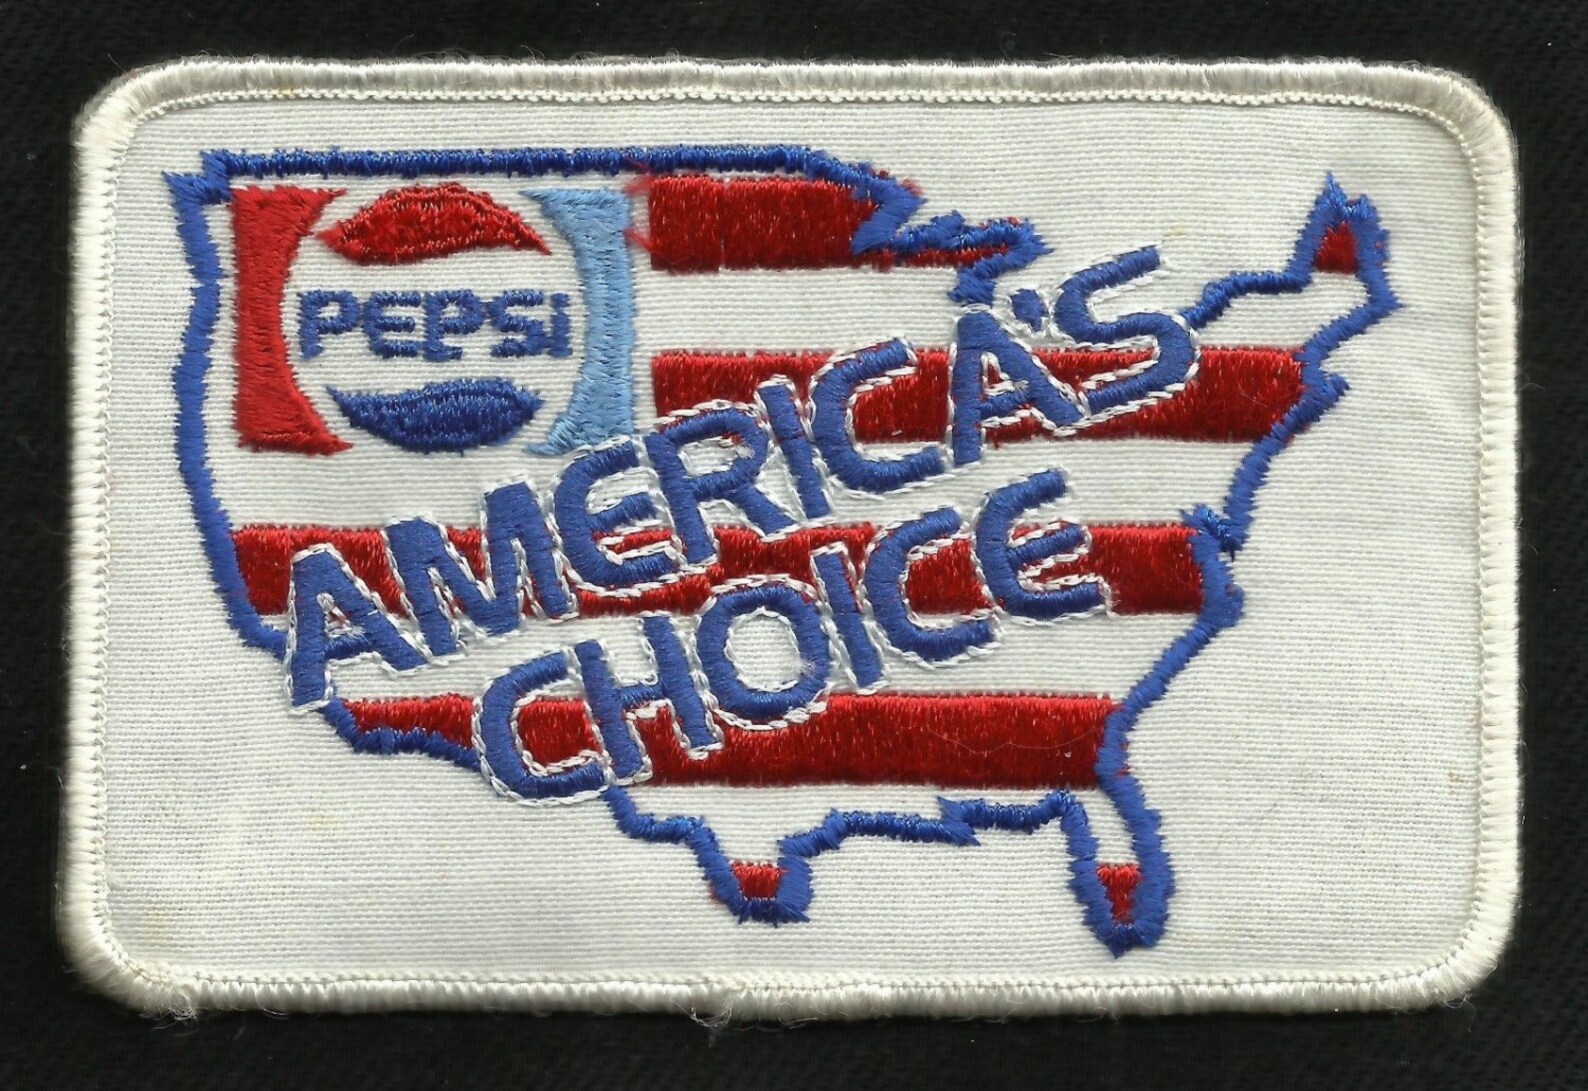 Pepsi America. Collection patch